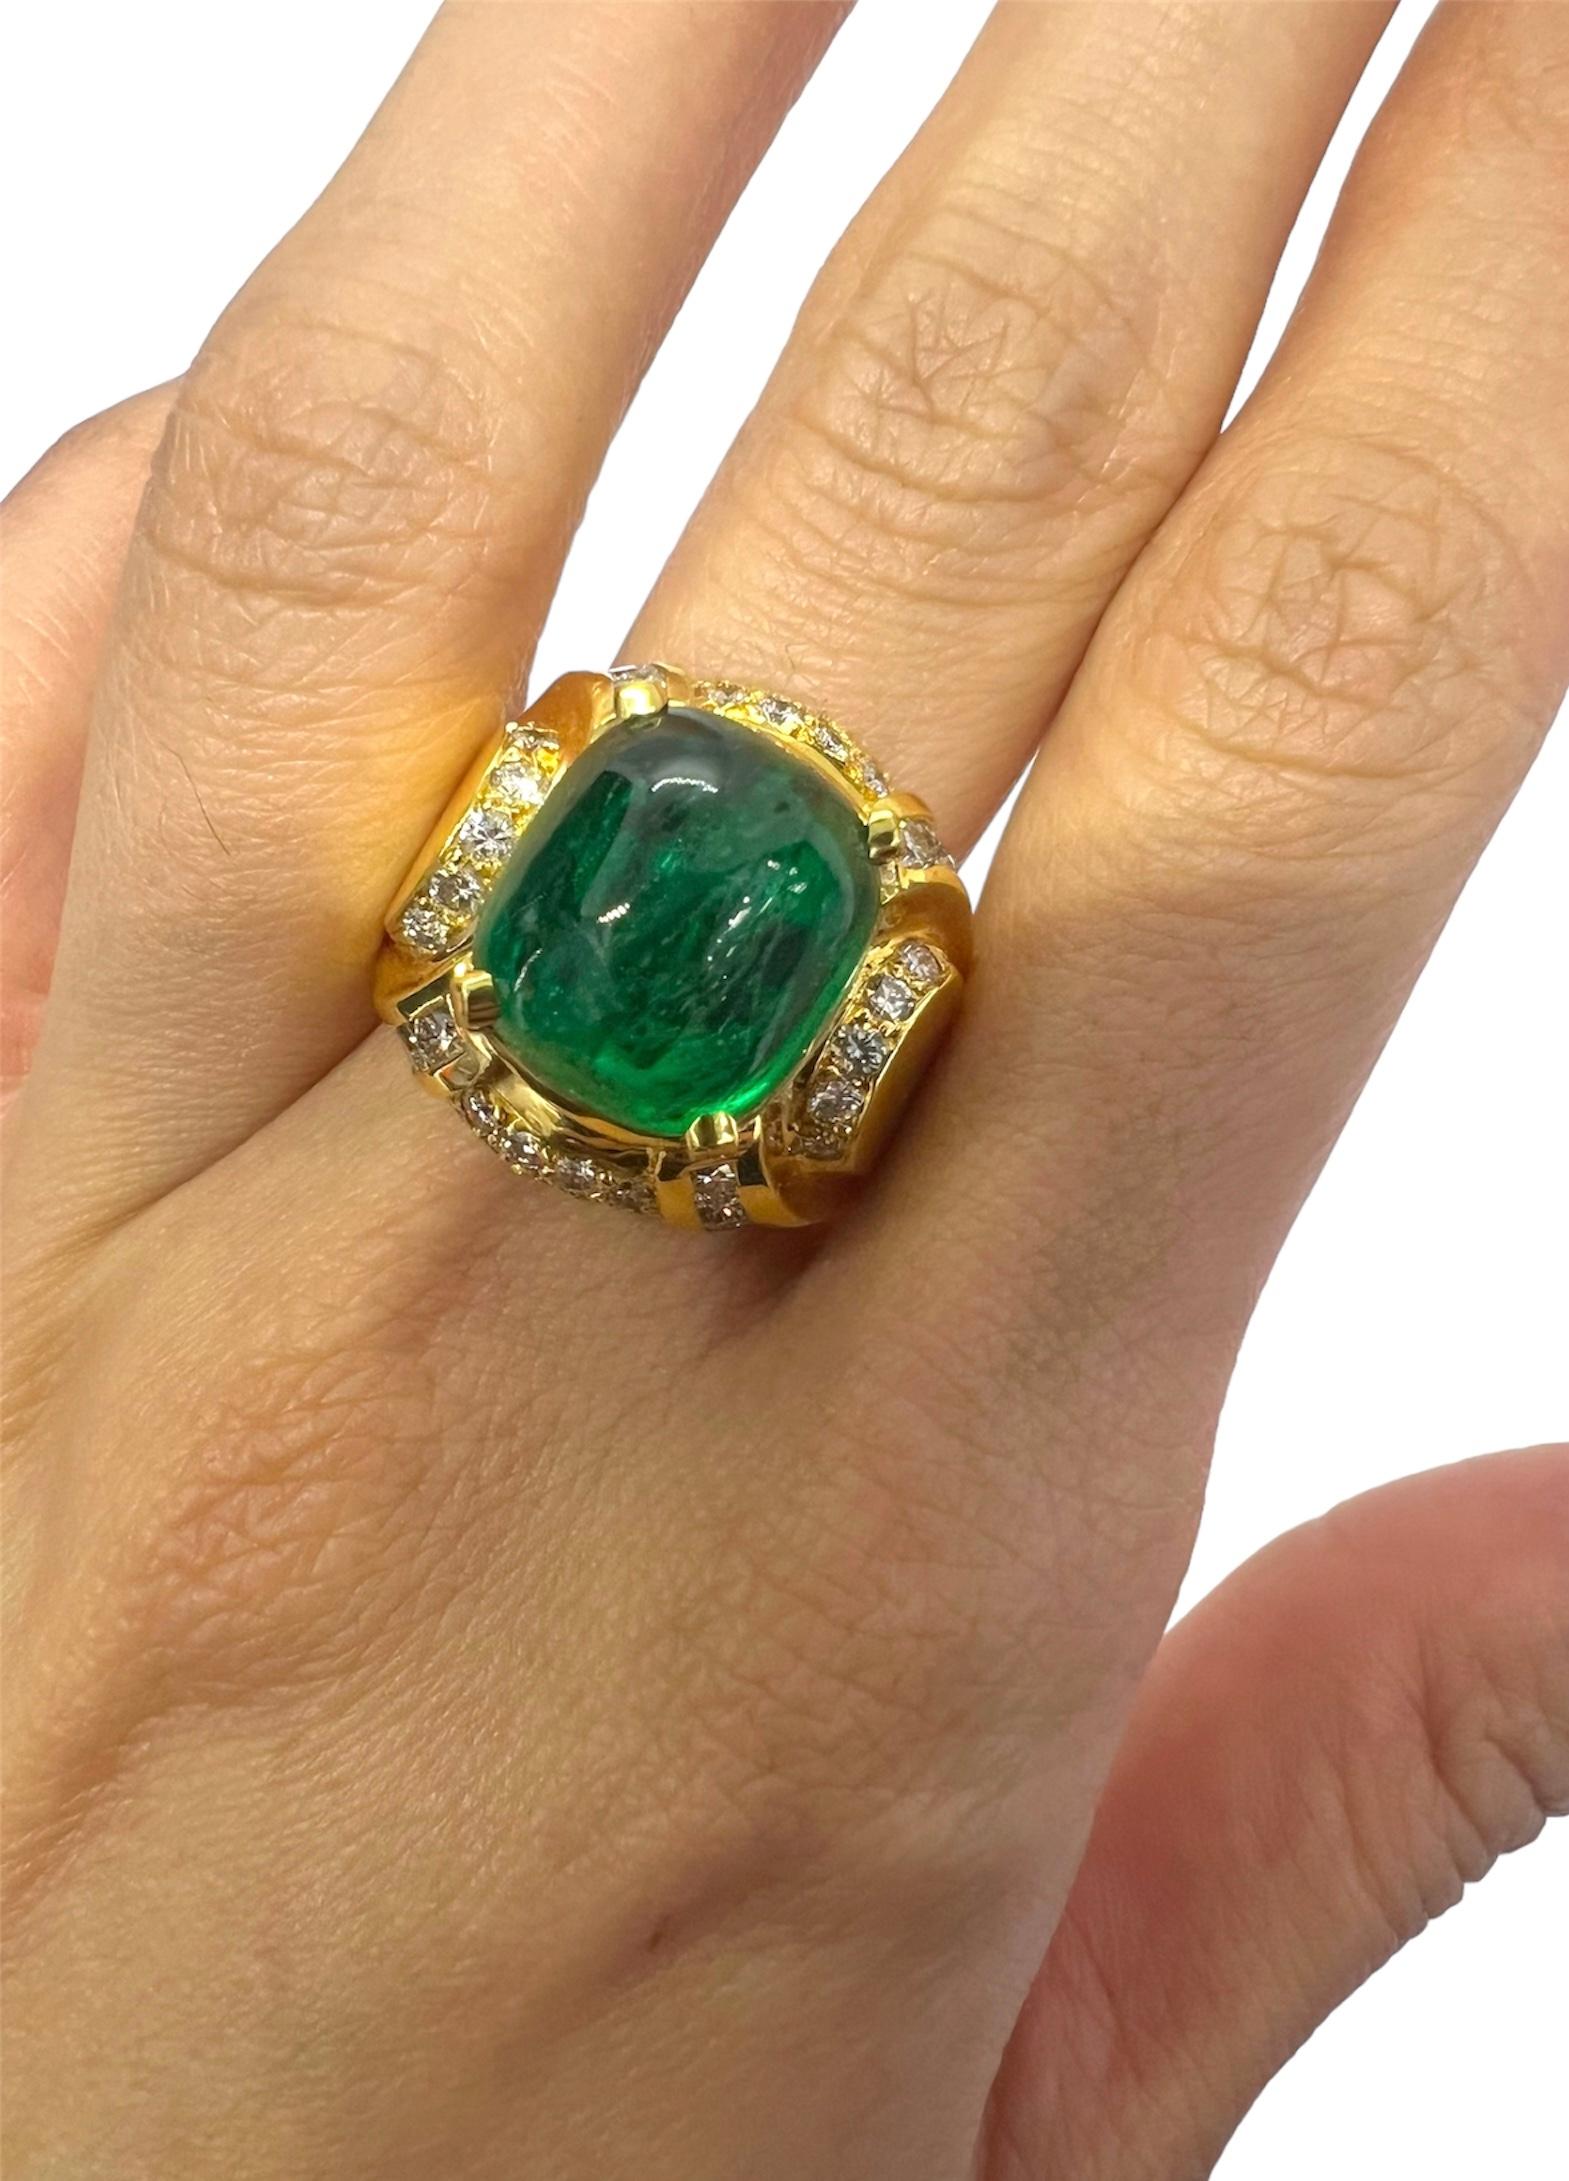 Yellow gold ring with cabochon emerald center stone accented with diamonds.

Sophia D by Joseph Dardashti LTD has been known worldwide for 35 years and are inspired by classic Art Deco design that merges with modern manufacturing techniques.